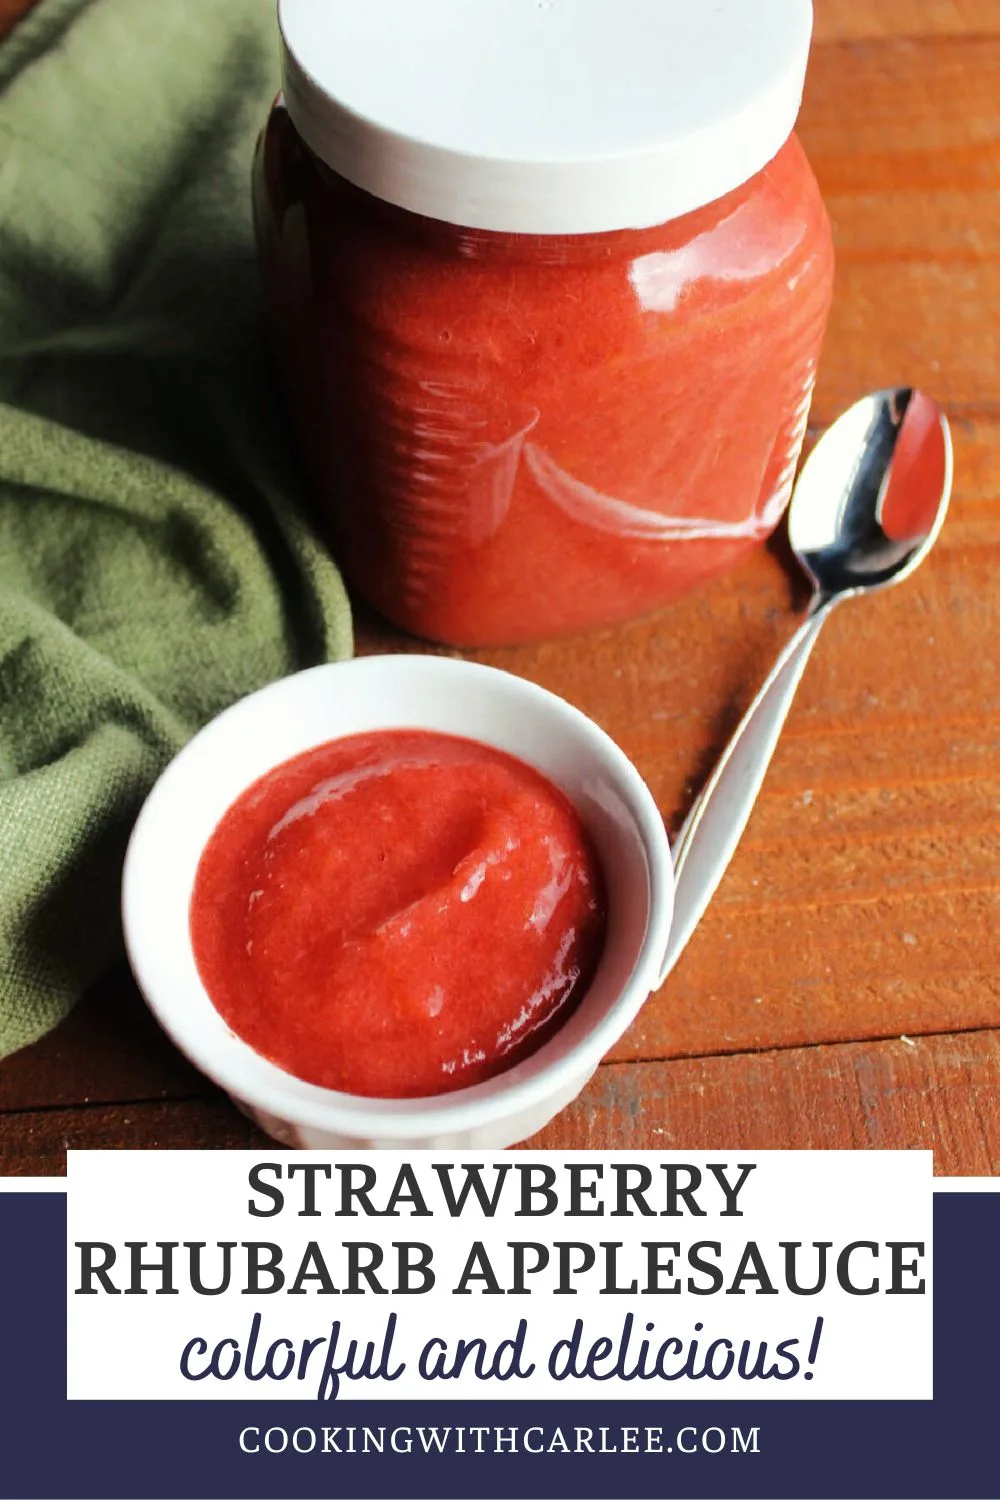 Strawberry and rhubarb add great pink color and flavor to applesauce. Sweetened with honey, this tasty sauce is great as a snack or as a side dish. You can also stir it into yogurt or oatmeal for even more flavor.